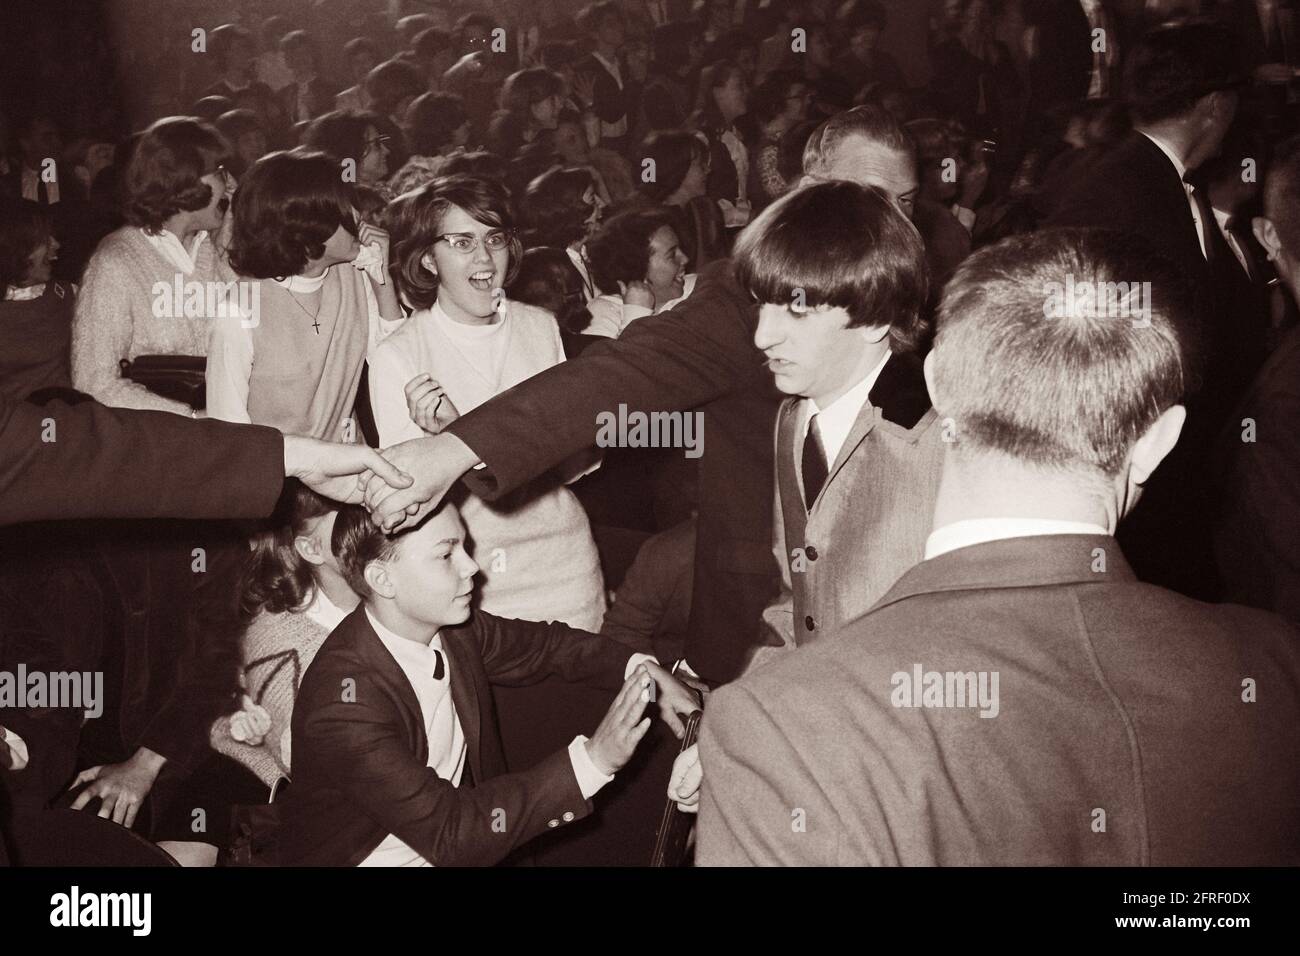 Police join hands to hold back adoring fans as Ringo Starr walks by at the Washington Coliseum in Washington, D.C., where The Beatles were performing in their first American concert on February 11, 1964. (USA) Stock Photo